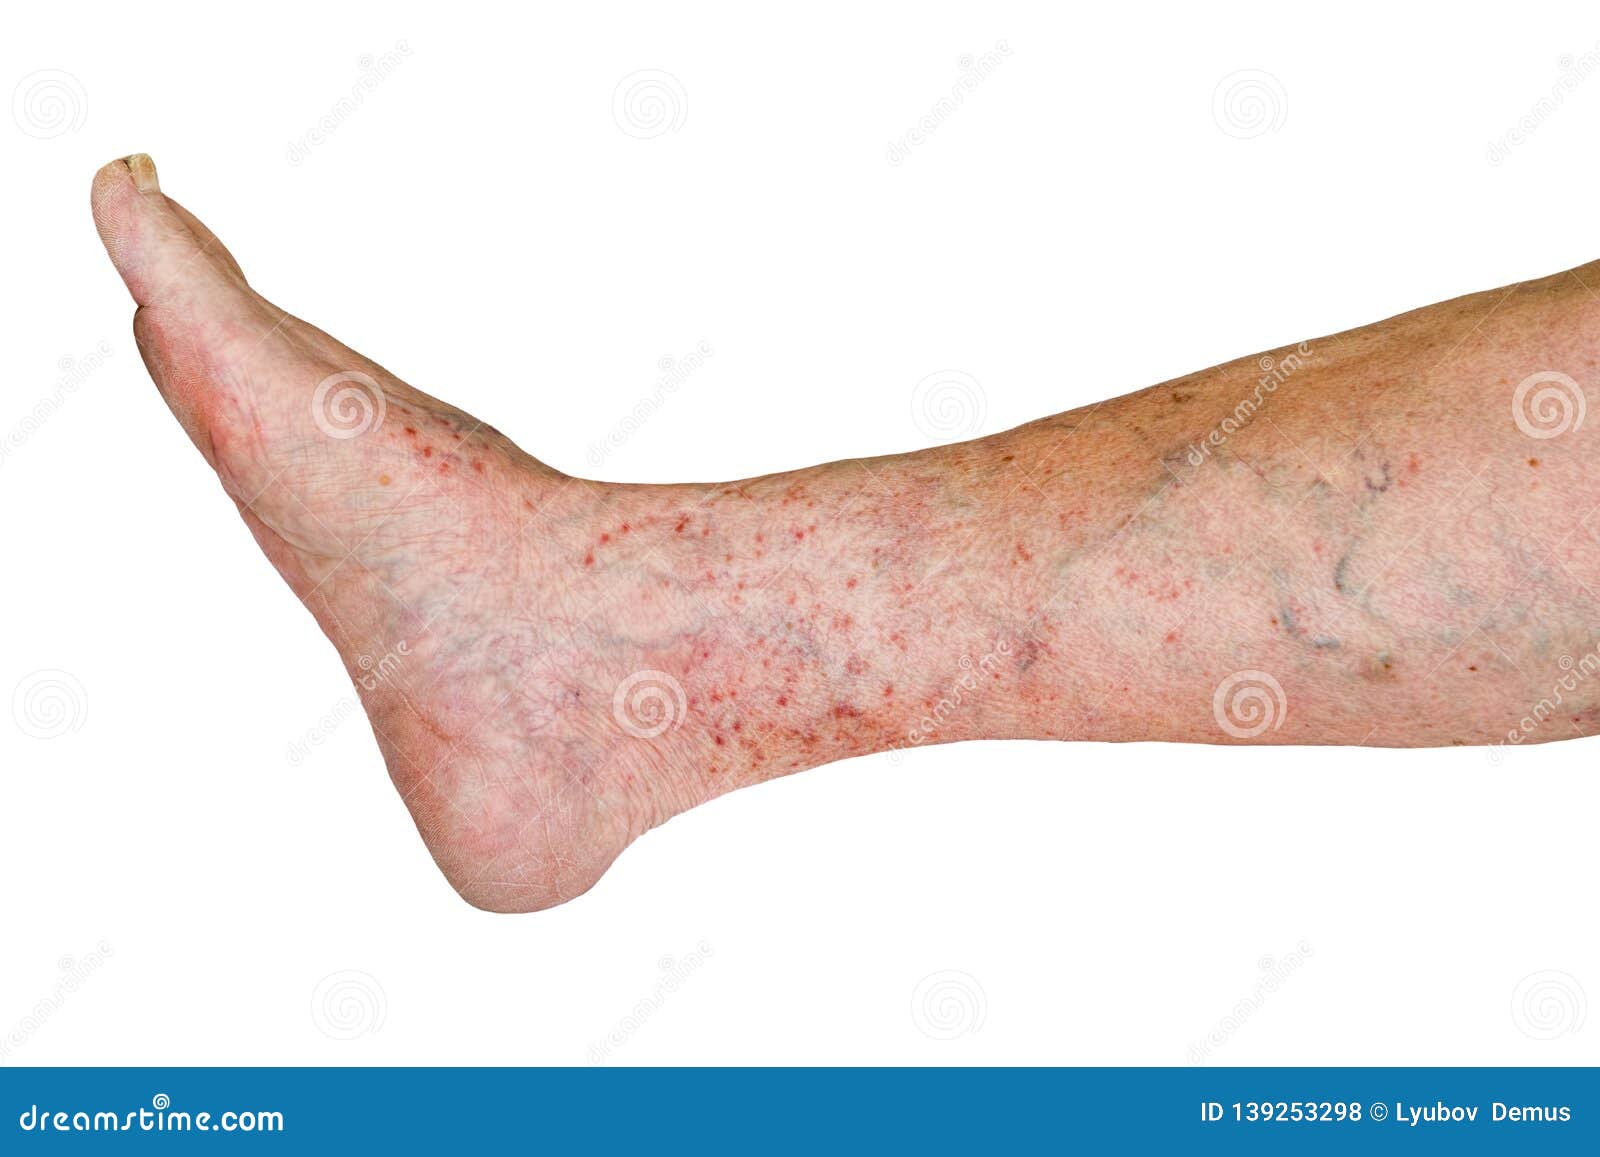 Old Woman`s Leg with Varicose Disease, Varicose Veins Isolated on